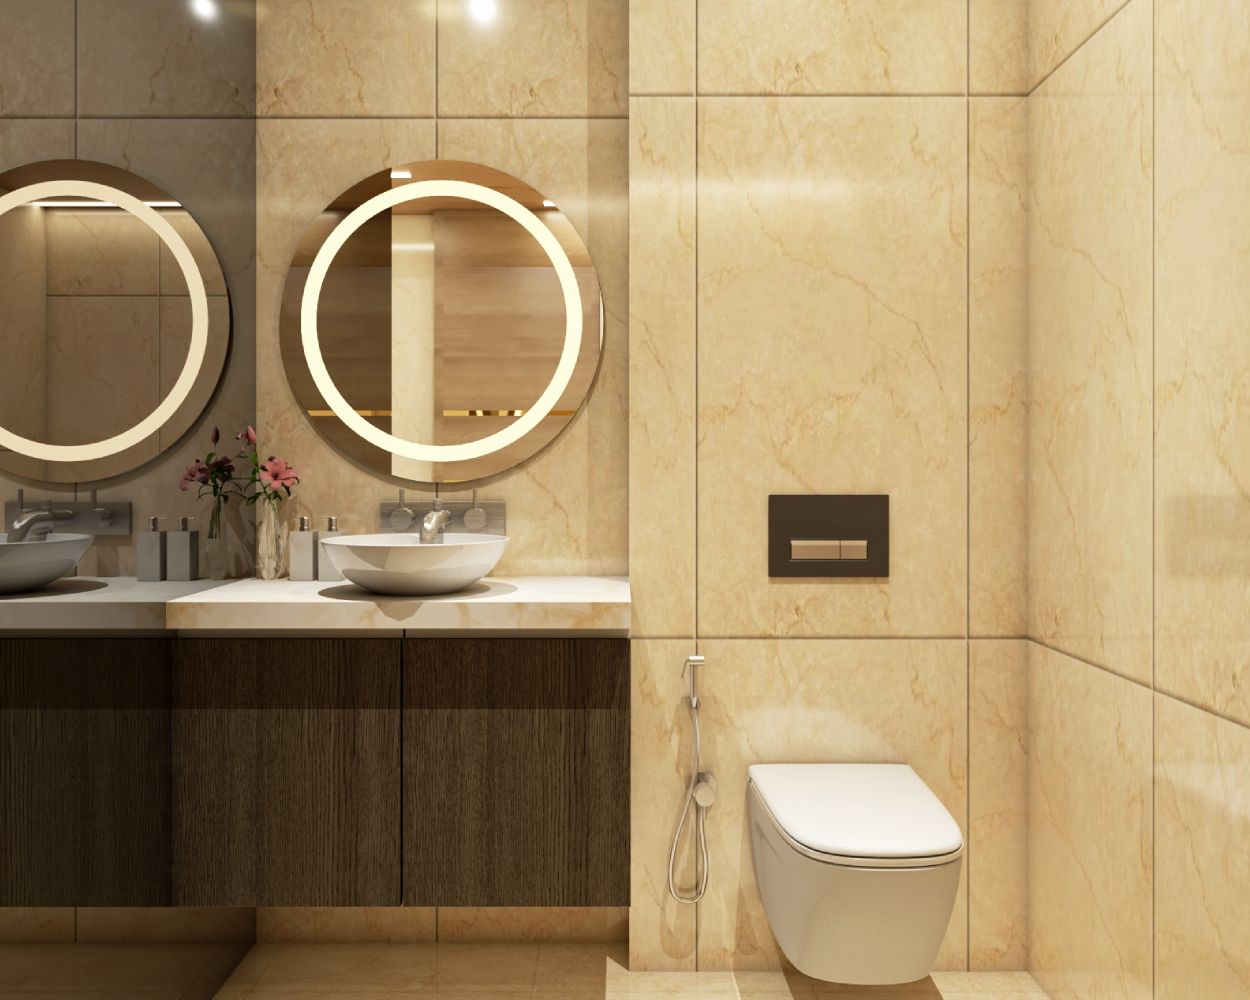 Contemporary Beige Bathroom Design With White Bathroom Counterop And Wooden Vanity Unit